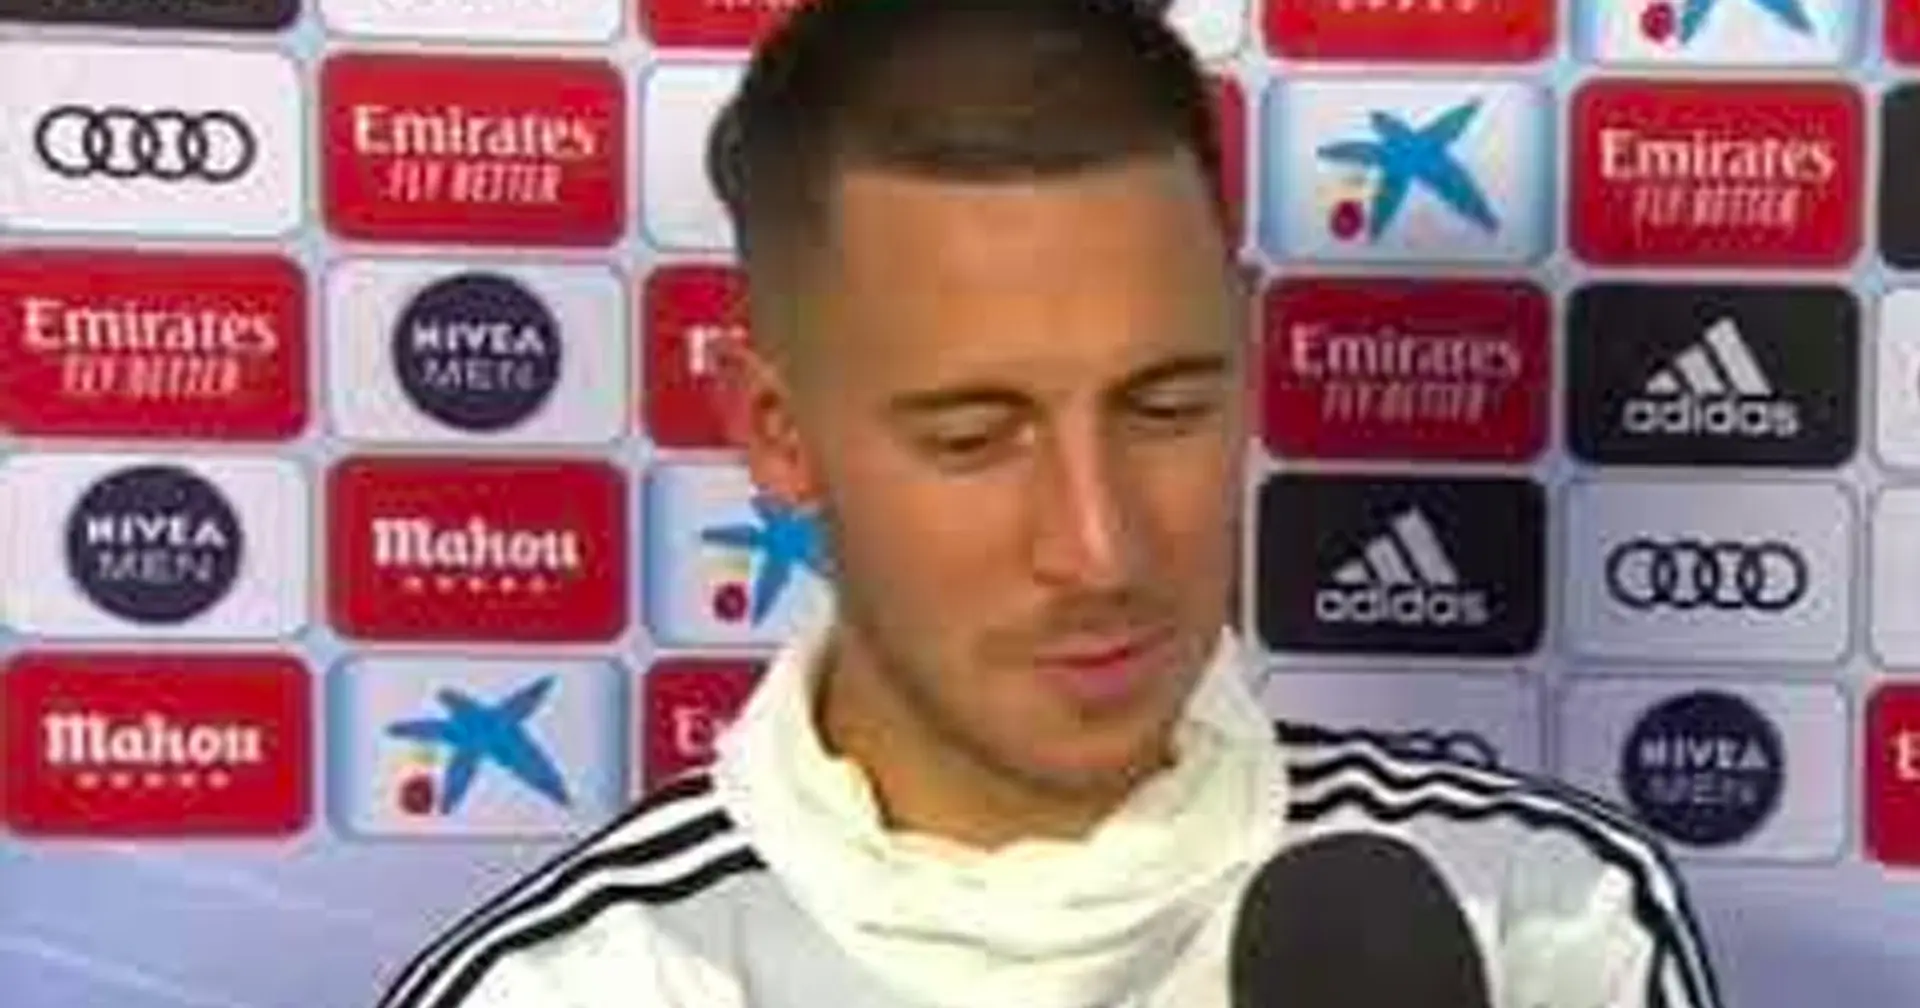 Hazard: 'I plan to stay at Real Madrid next season. I want to play more'